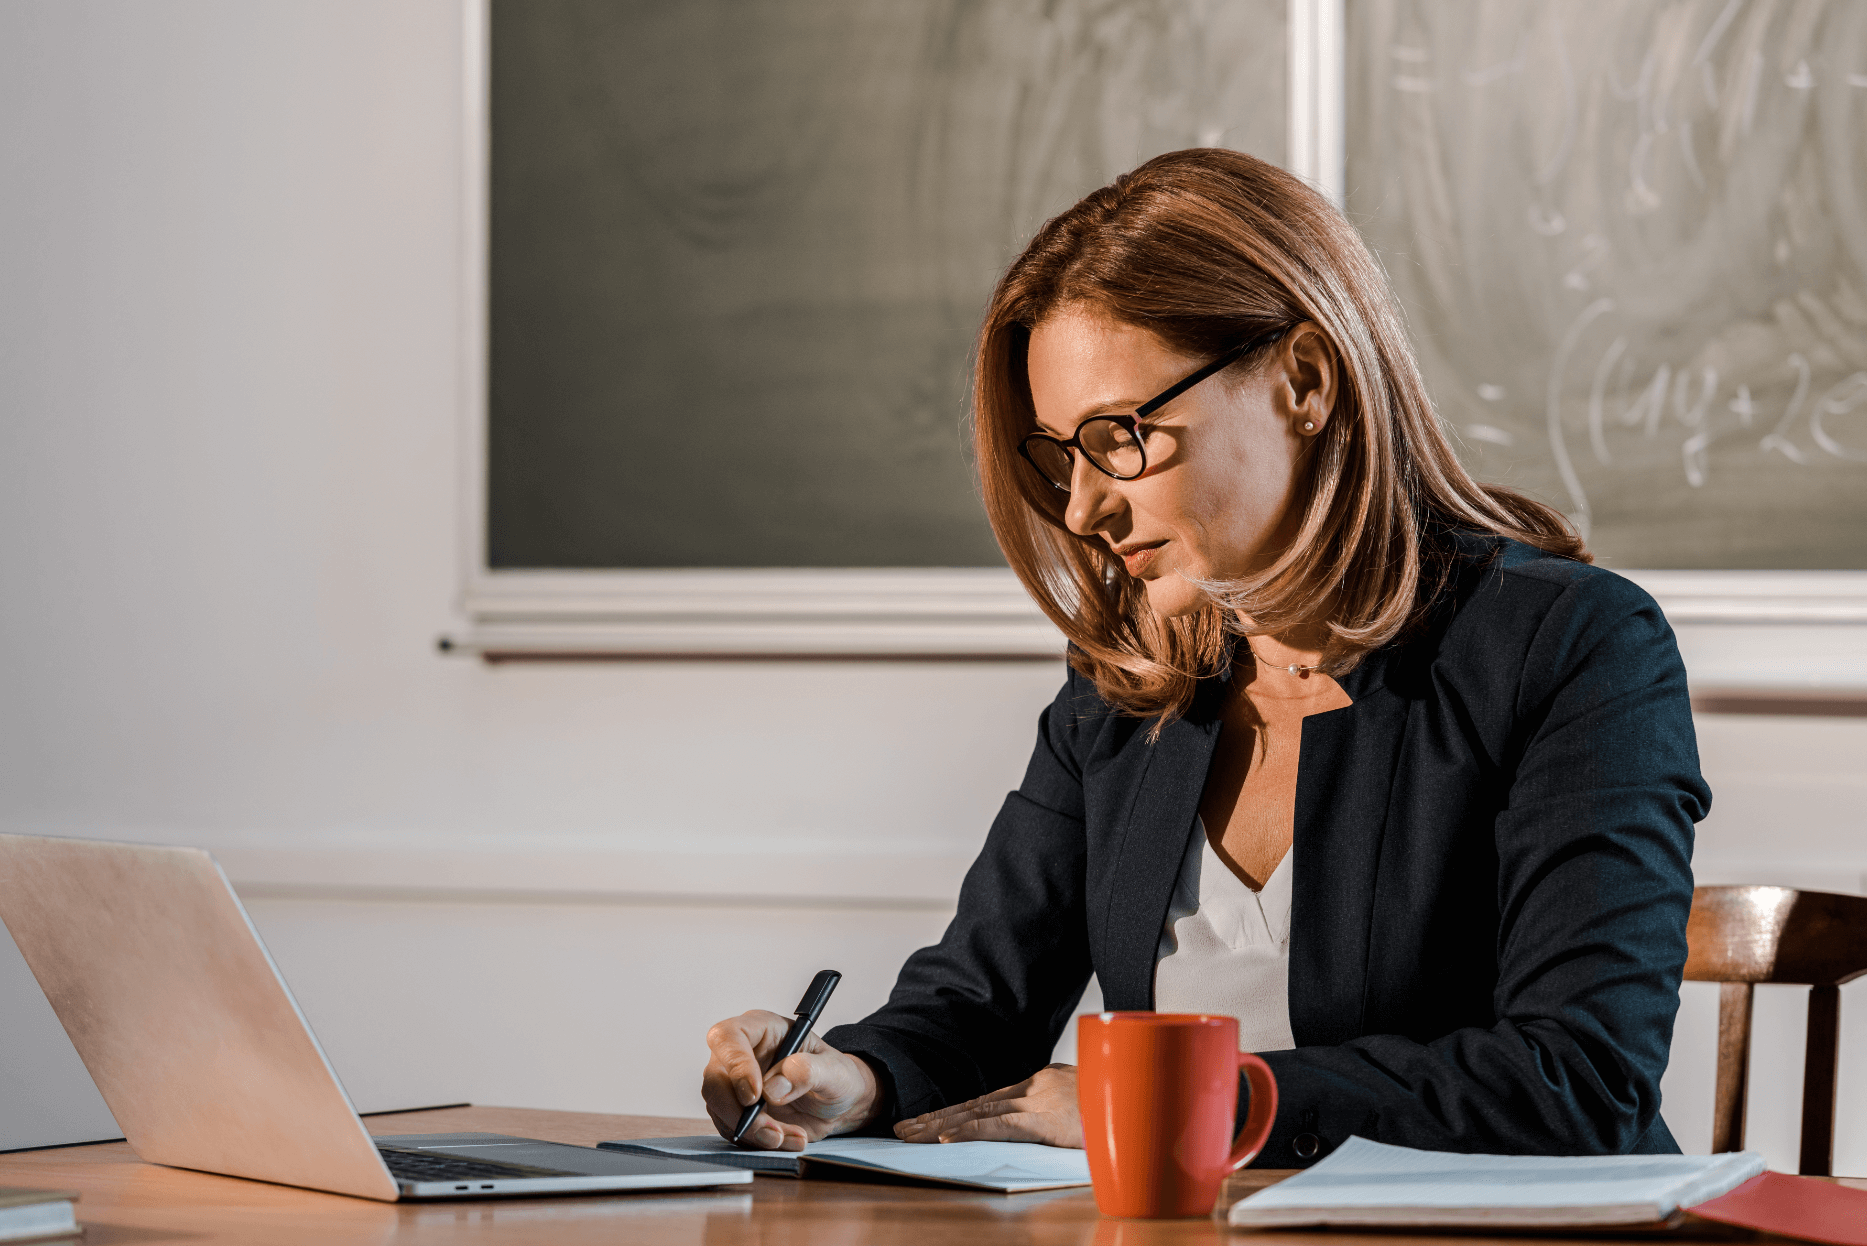 Teacher sitting alone at desk writing notes